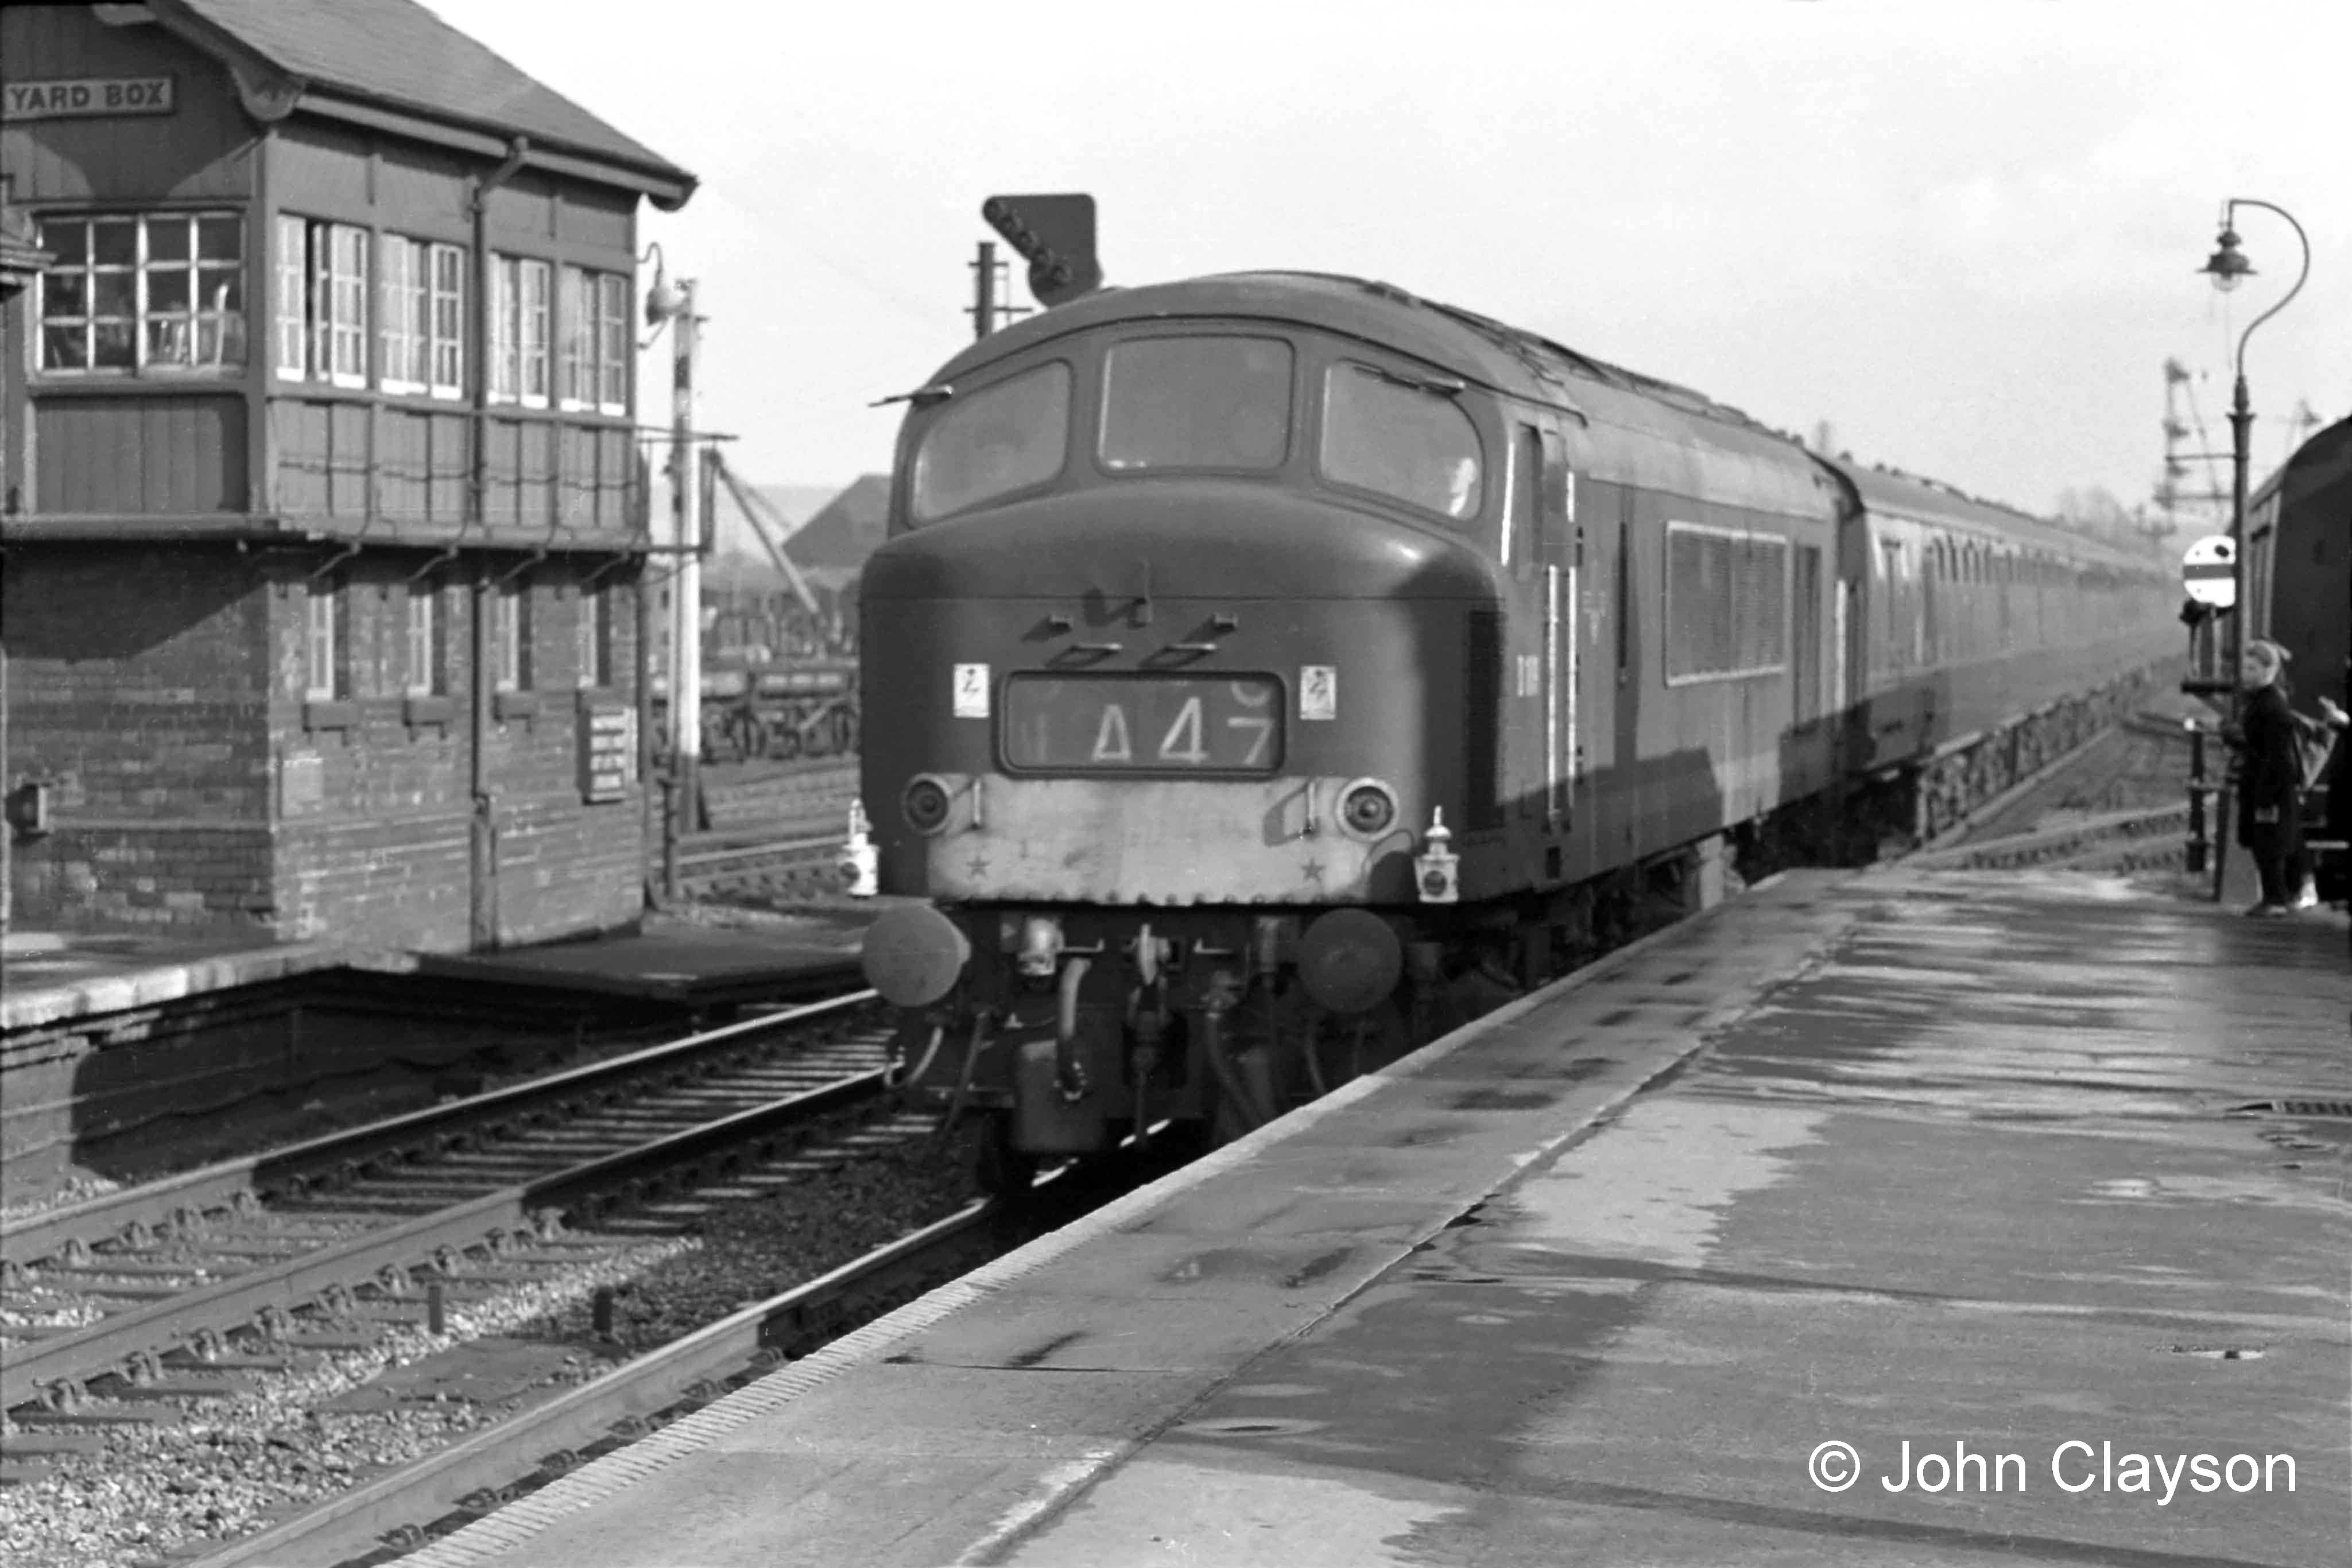 On April 18th 1963 a northbound passenger train passes the Yard Box on the Down Main line, hauled by a diesel electric locomotive of the ‘Peak’ class, so called because the first ten were named after English and Welsh mountains. Train 1A47 would be the southbound The Heart of Midlothian at that time, so it would seem that this locomotive has faulty train indicator blinds. It is also carrying 'Class 1' express passenger train oil headlamps, as used on steam locomotives, which may be intended to show that the indicator blinds are not to be relied upon. Peak locomotives seemed prone to this problem. This could possibly be service 1A42, the 15:00 from King's Cross to Newcastle, which would be at Grantham around 16:45. Photograph by Cedric A. Clayson,